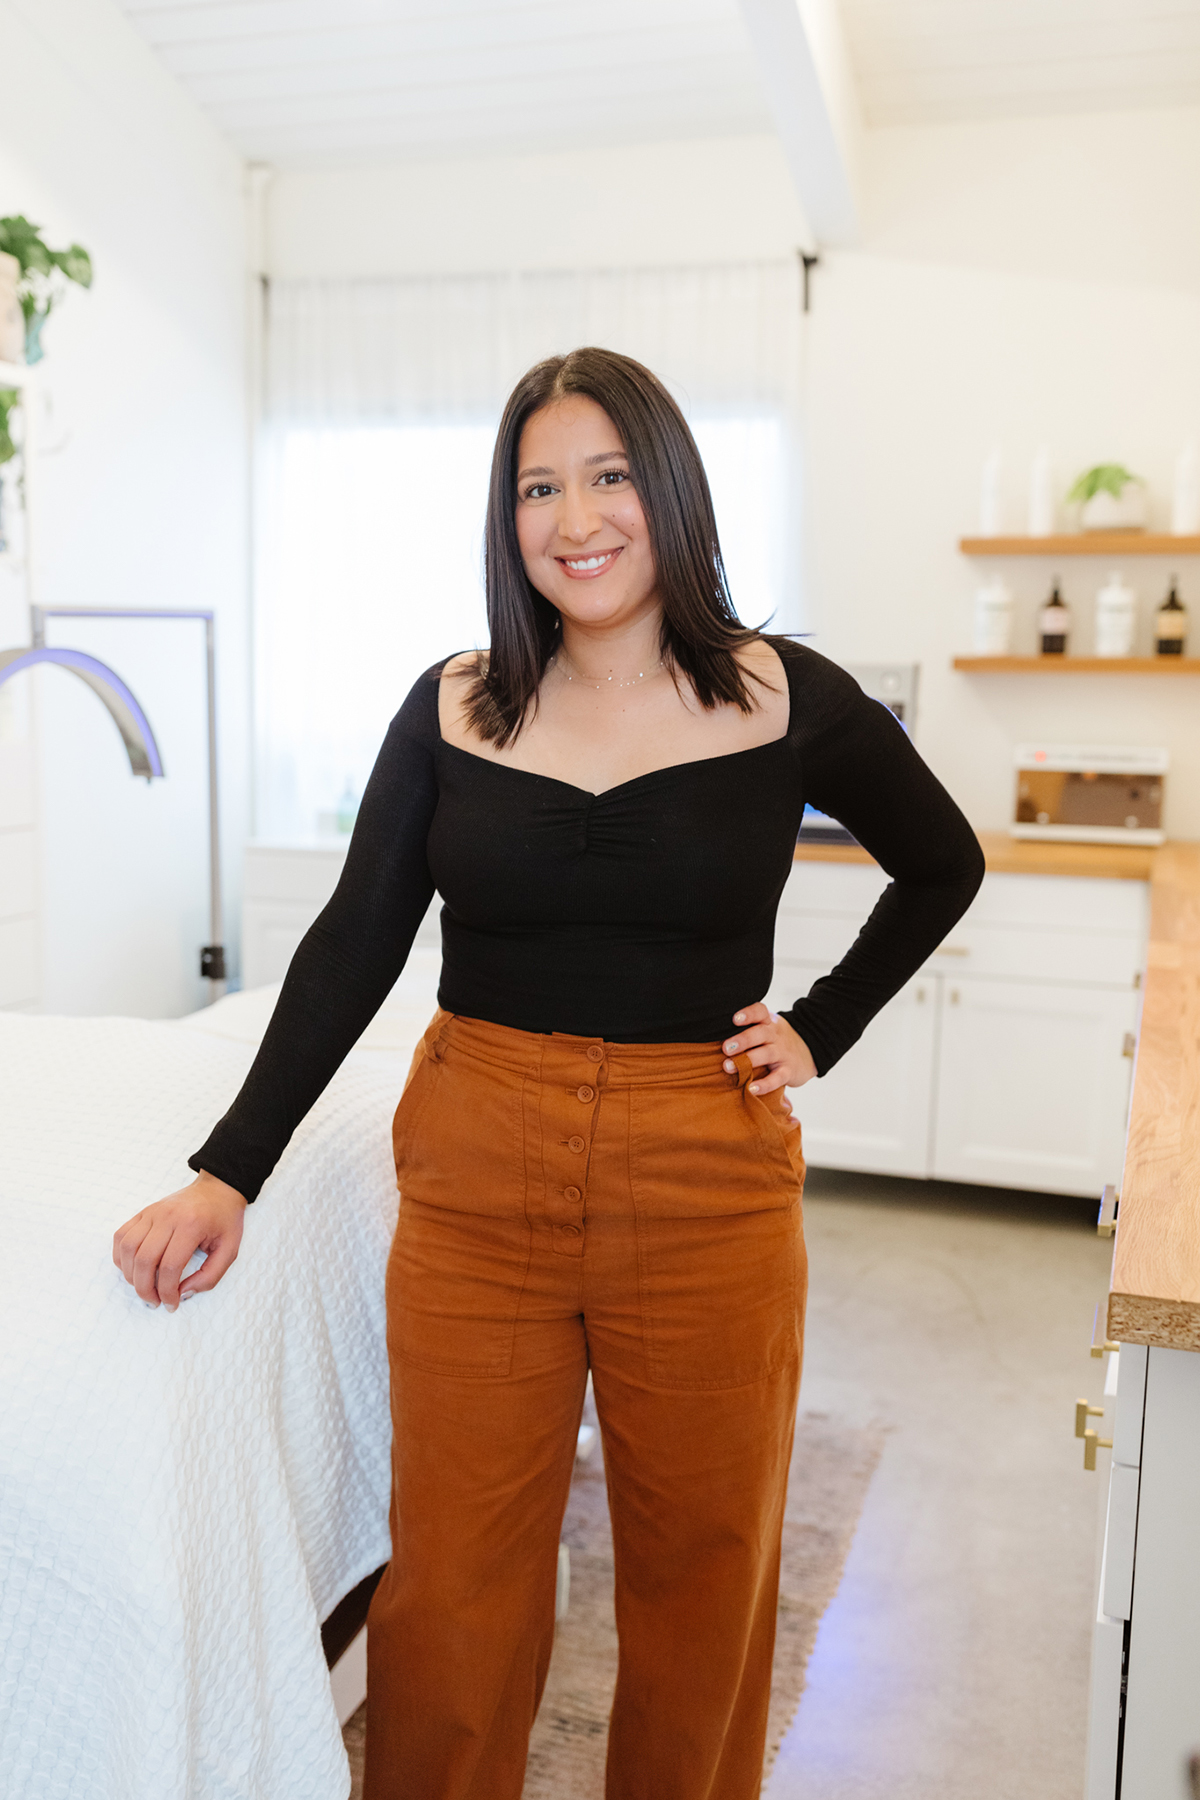 Stephanie Vega, Owner of Bare Complexion Skincare and Acne